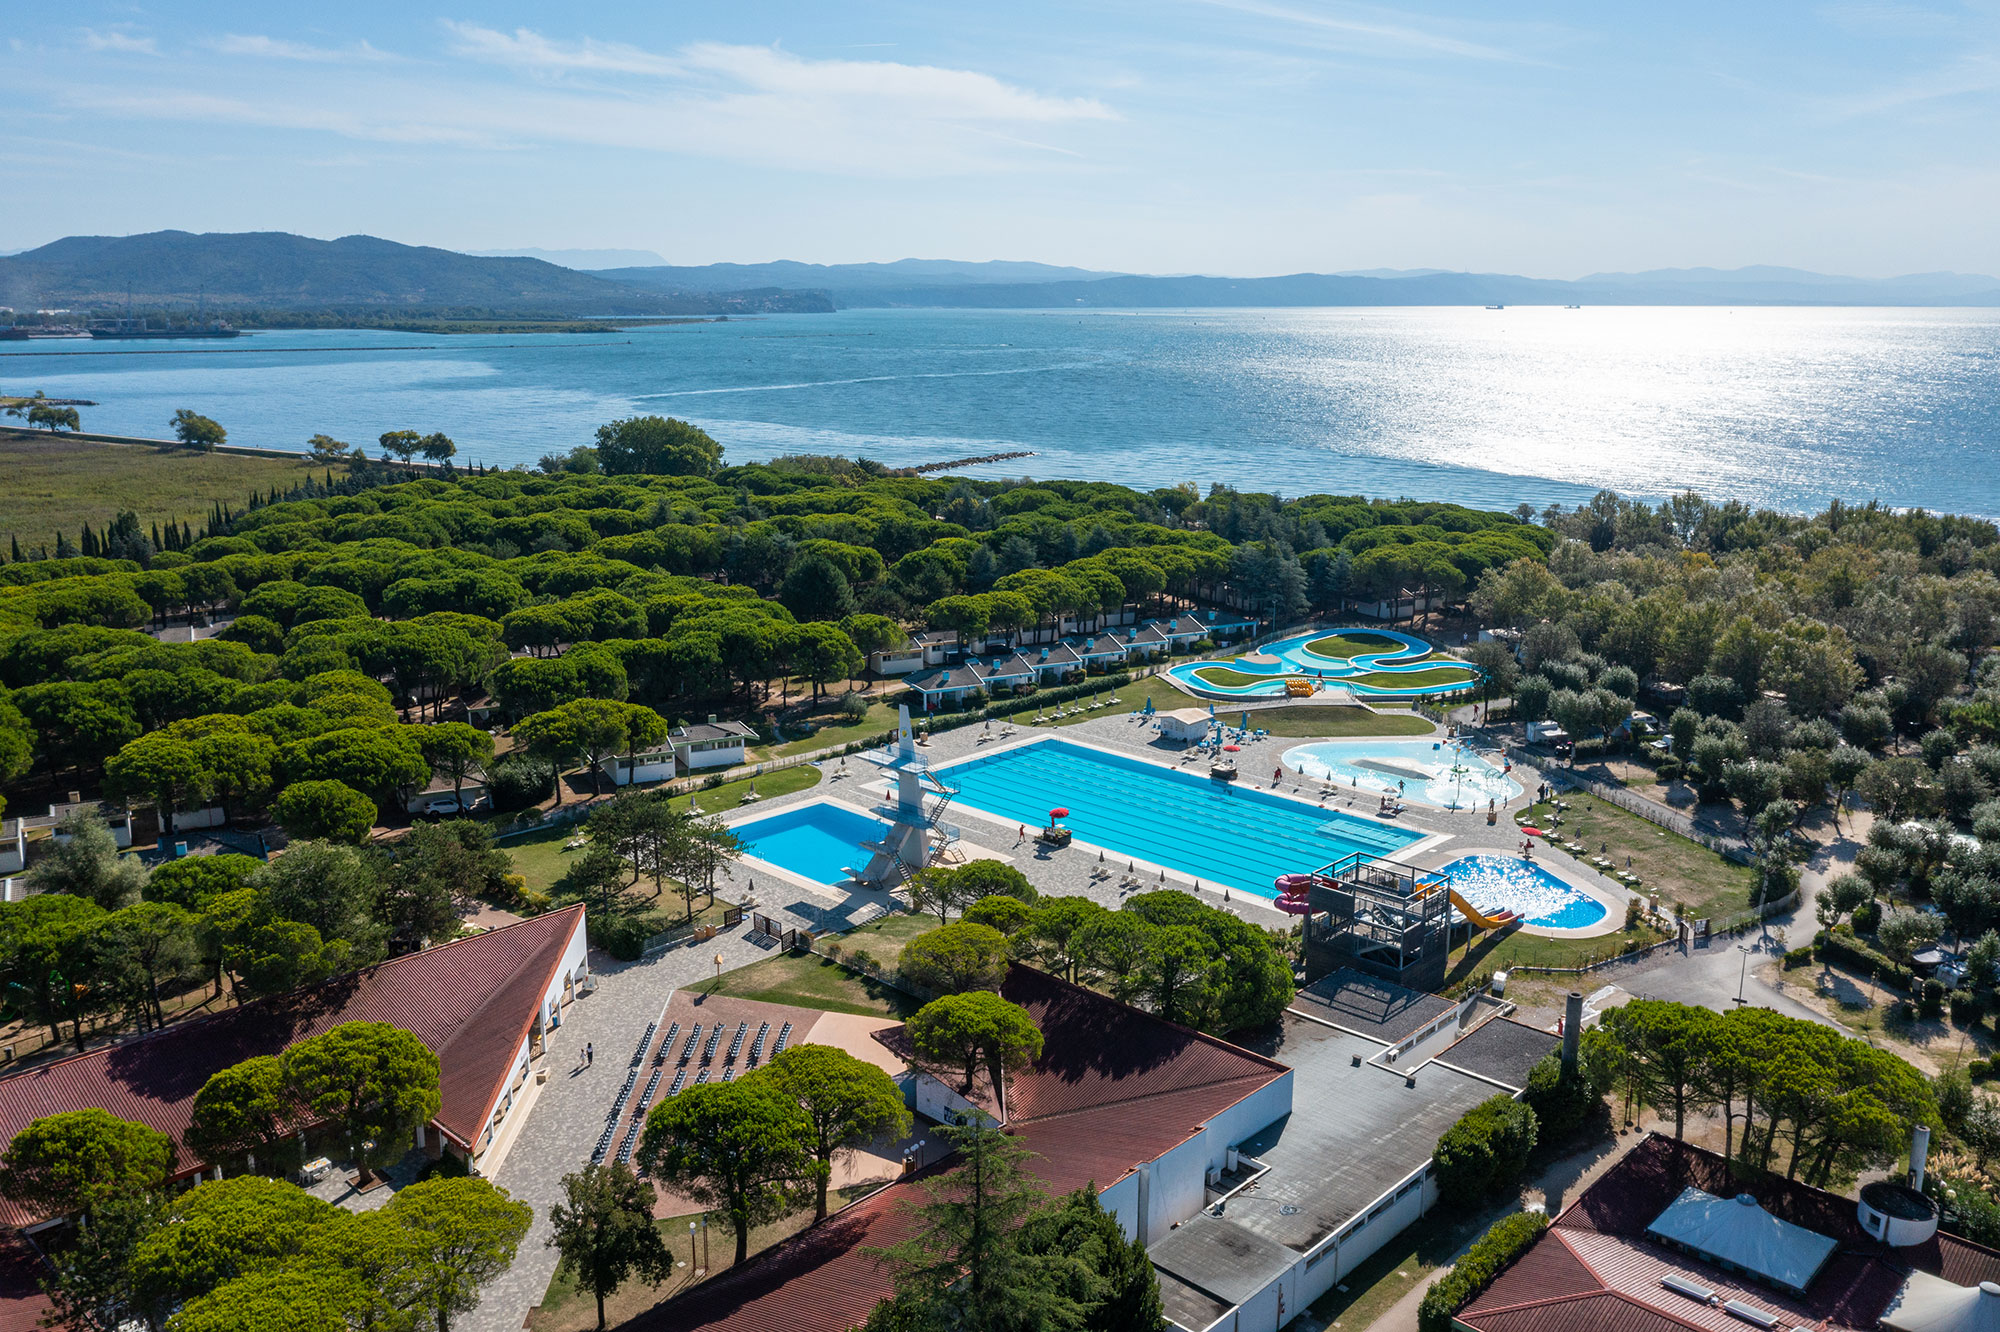 All the information you need about Marina Julia Family Camping Village